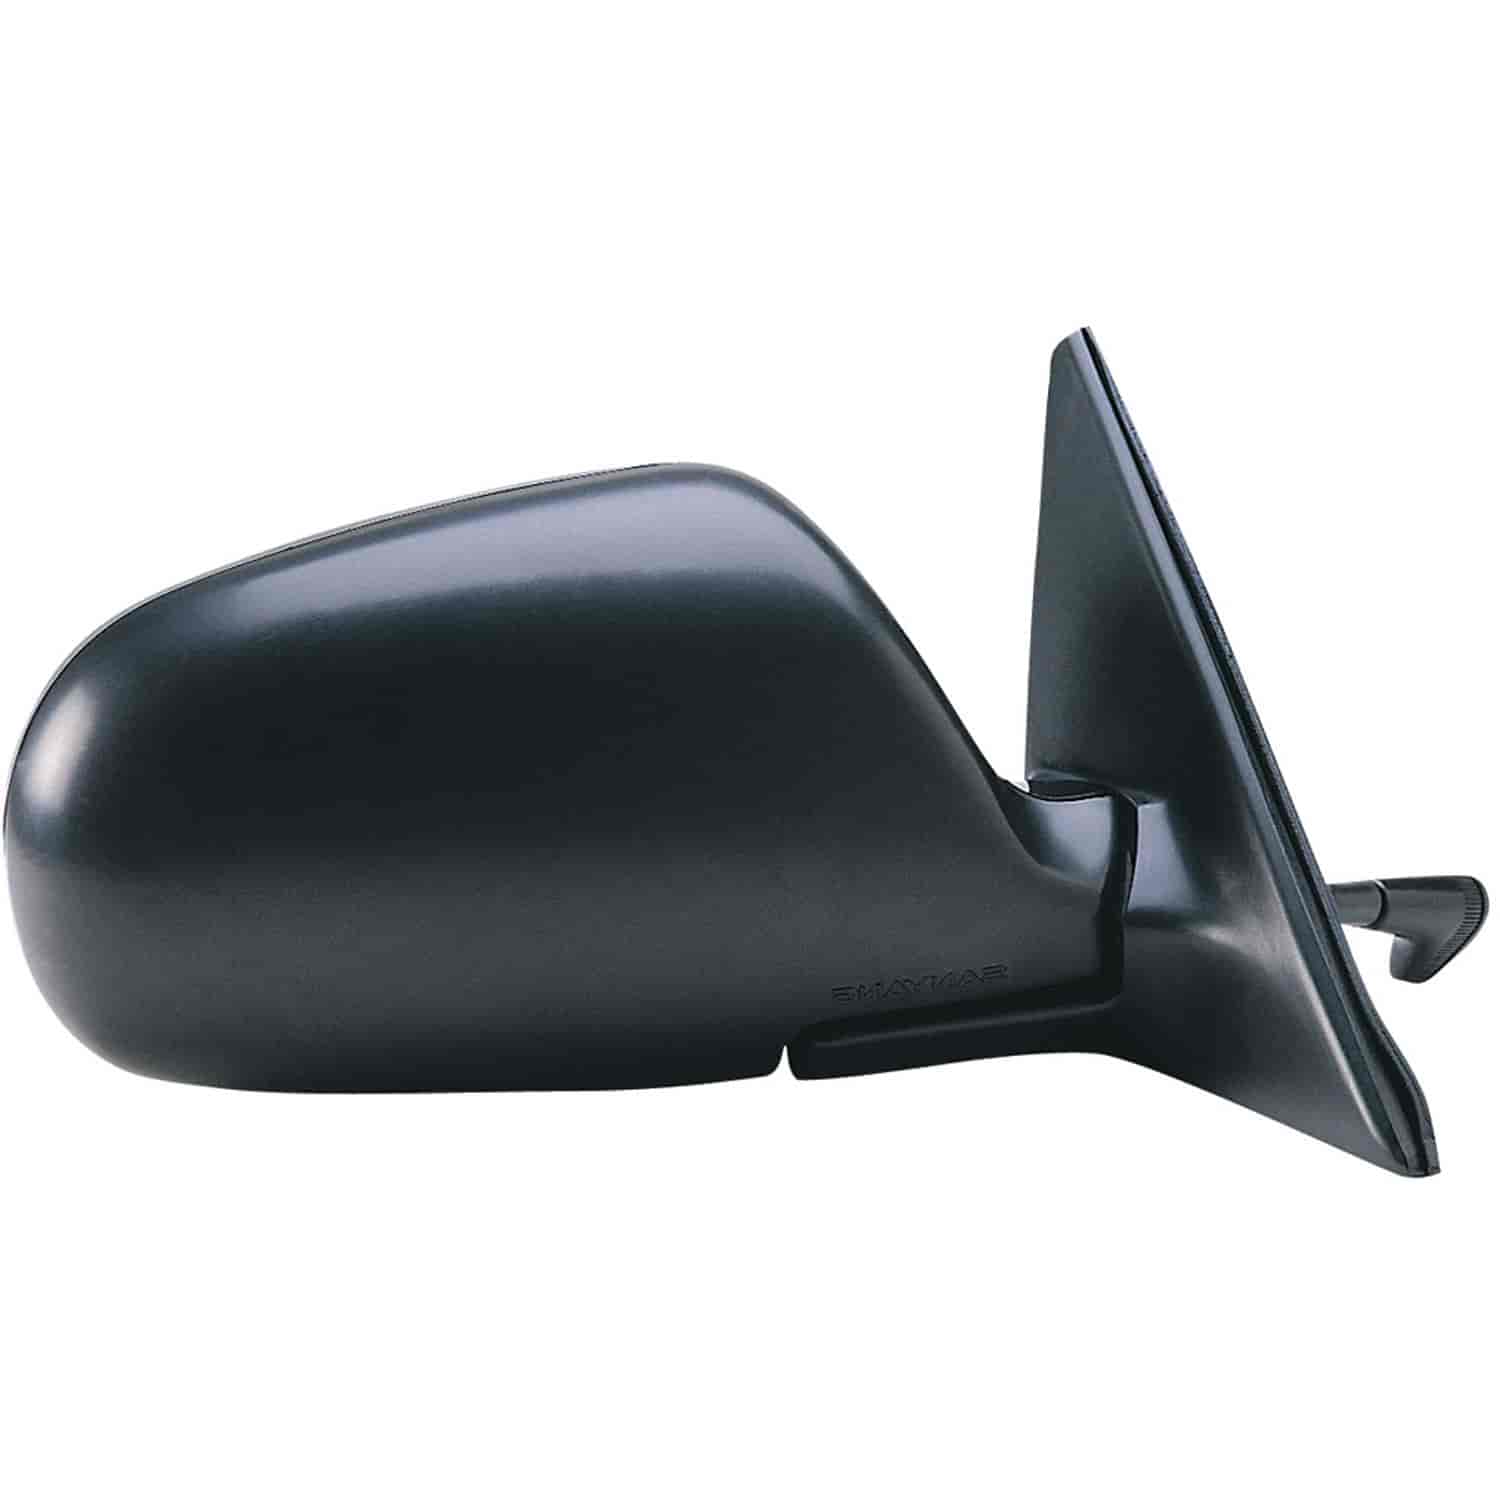 OEM Style Replacement mirror for 93 Honda Accord Sedan passenger side mirror tested to fit and funct